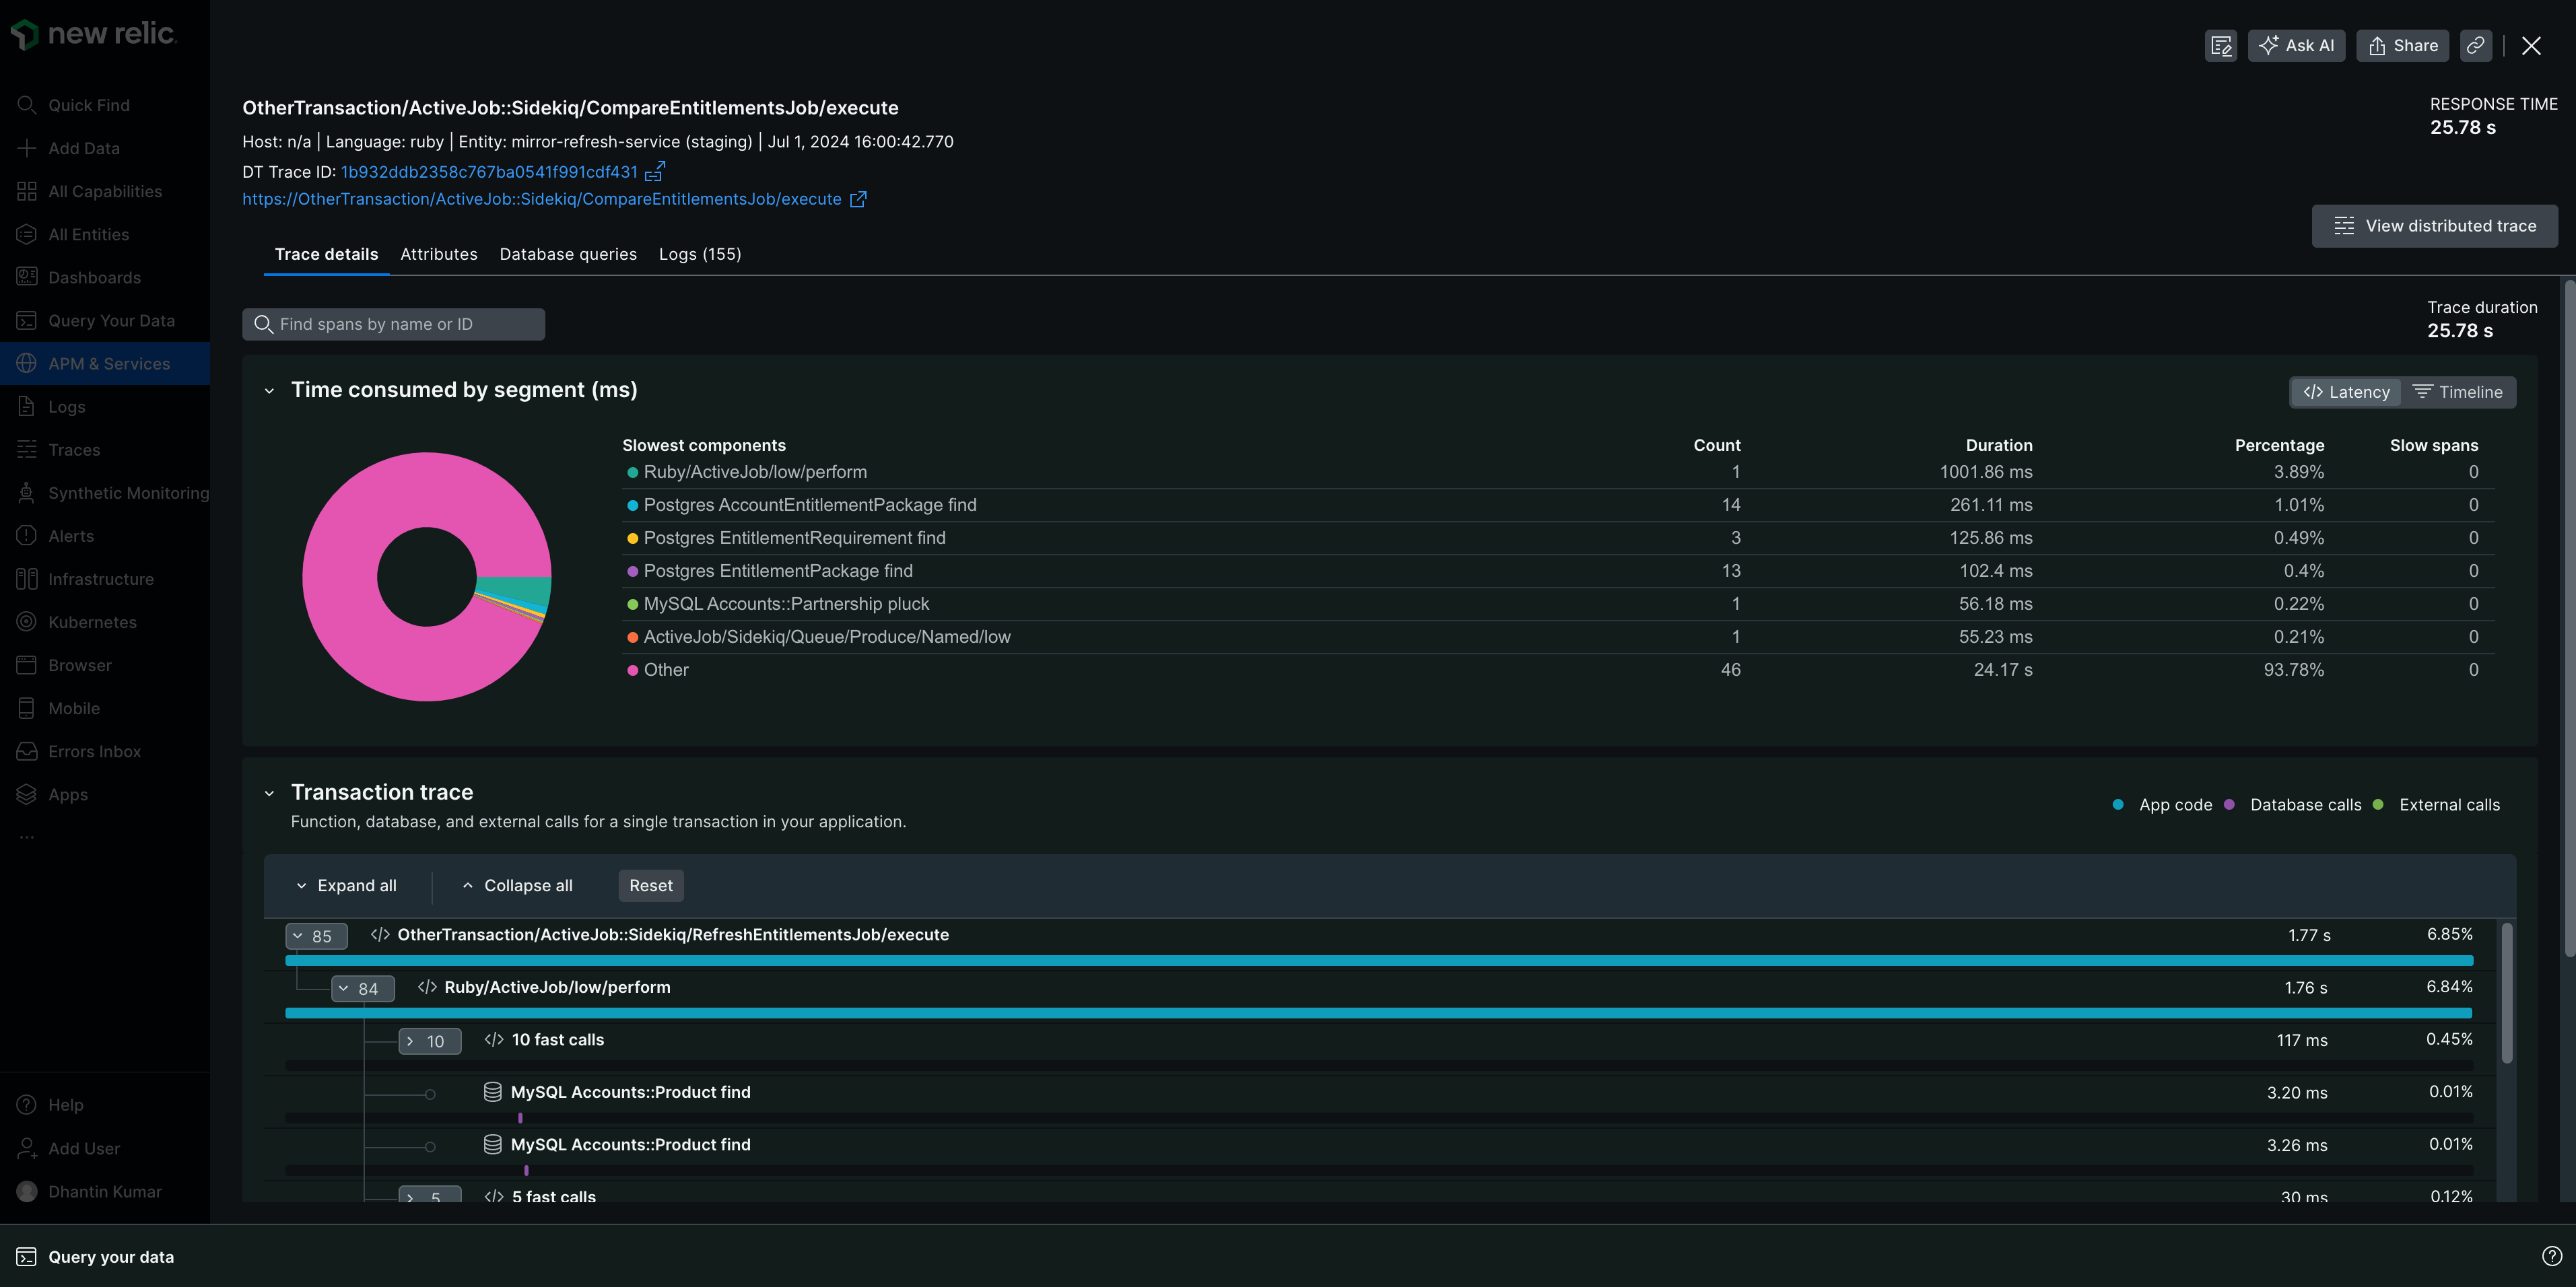 A screenshot depicting the transaction trace details view.